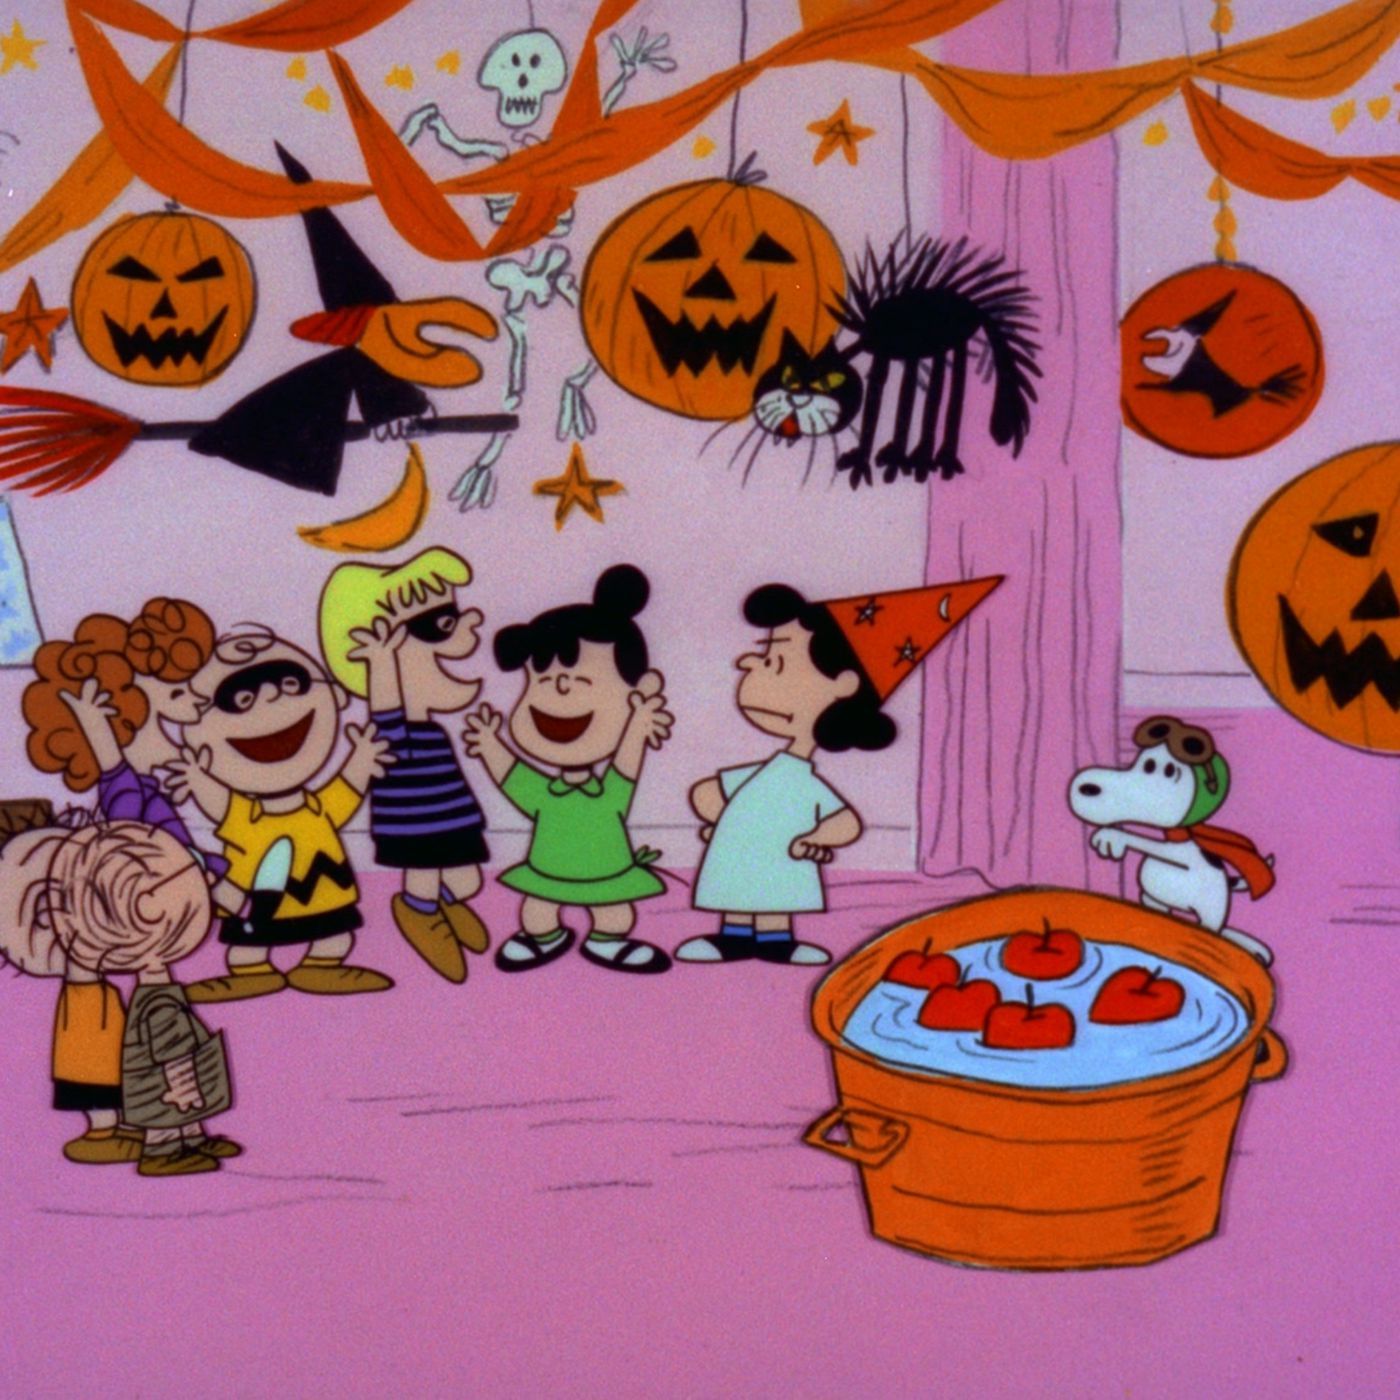 The Peanuts gang celebrates Halloween in this classic scene from It's the Great Pumpkin, Charlie Brown. - Charlie Brown